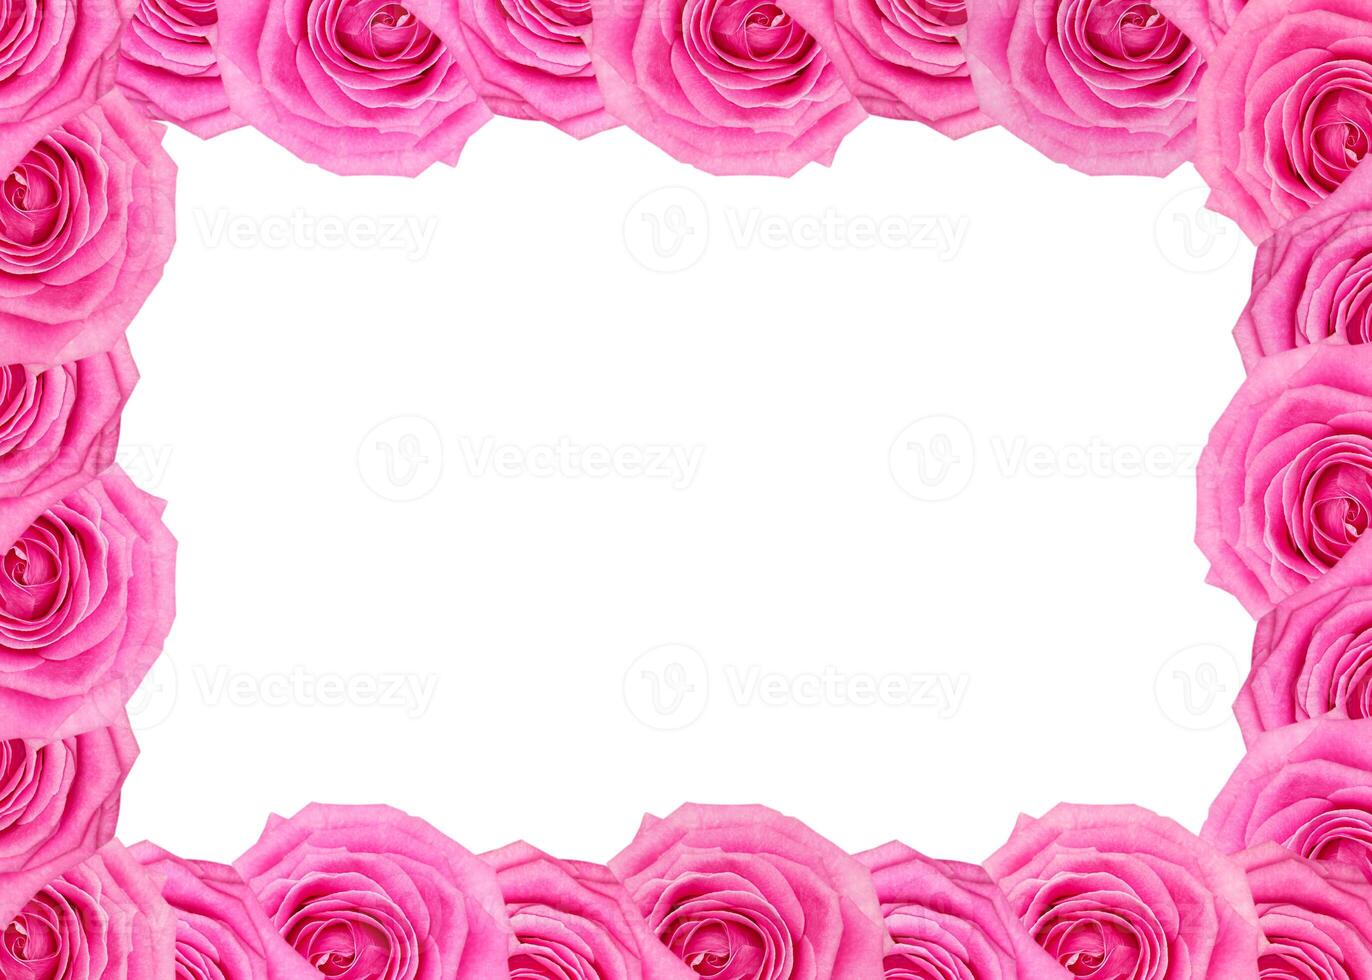 Flower frame of pink roses pattern isolated on white background photo